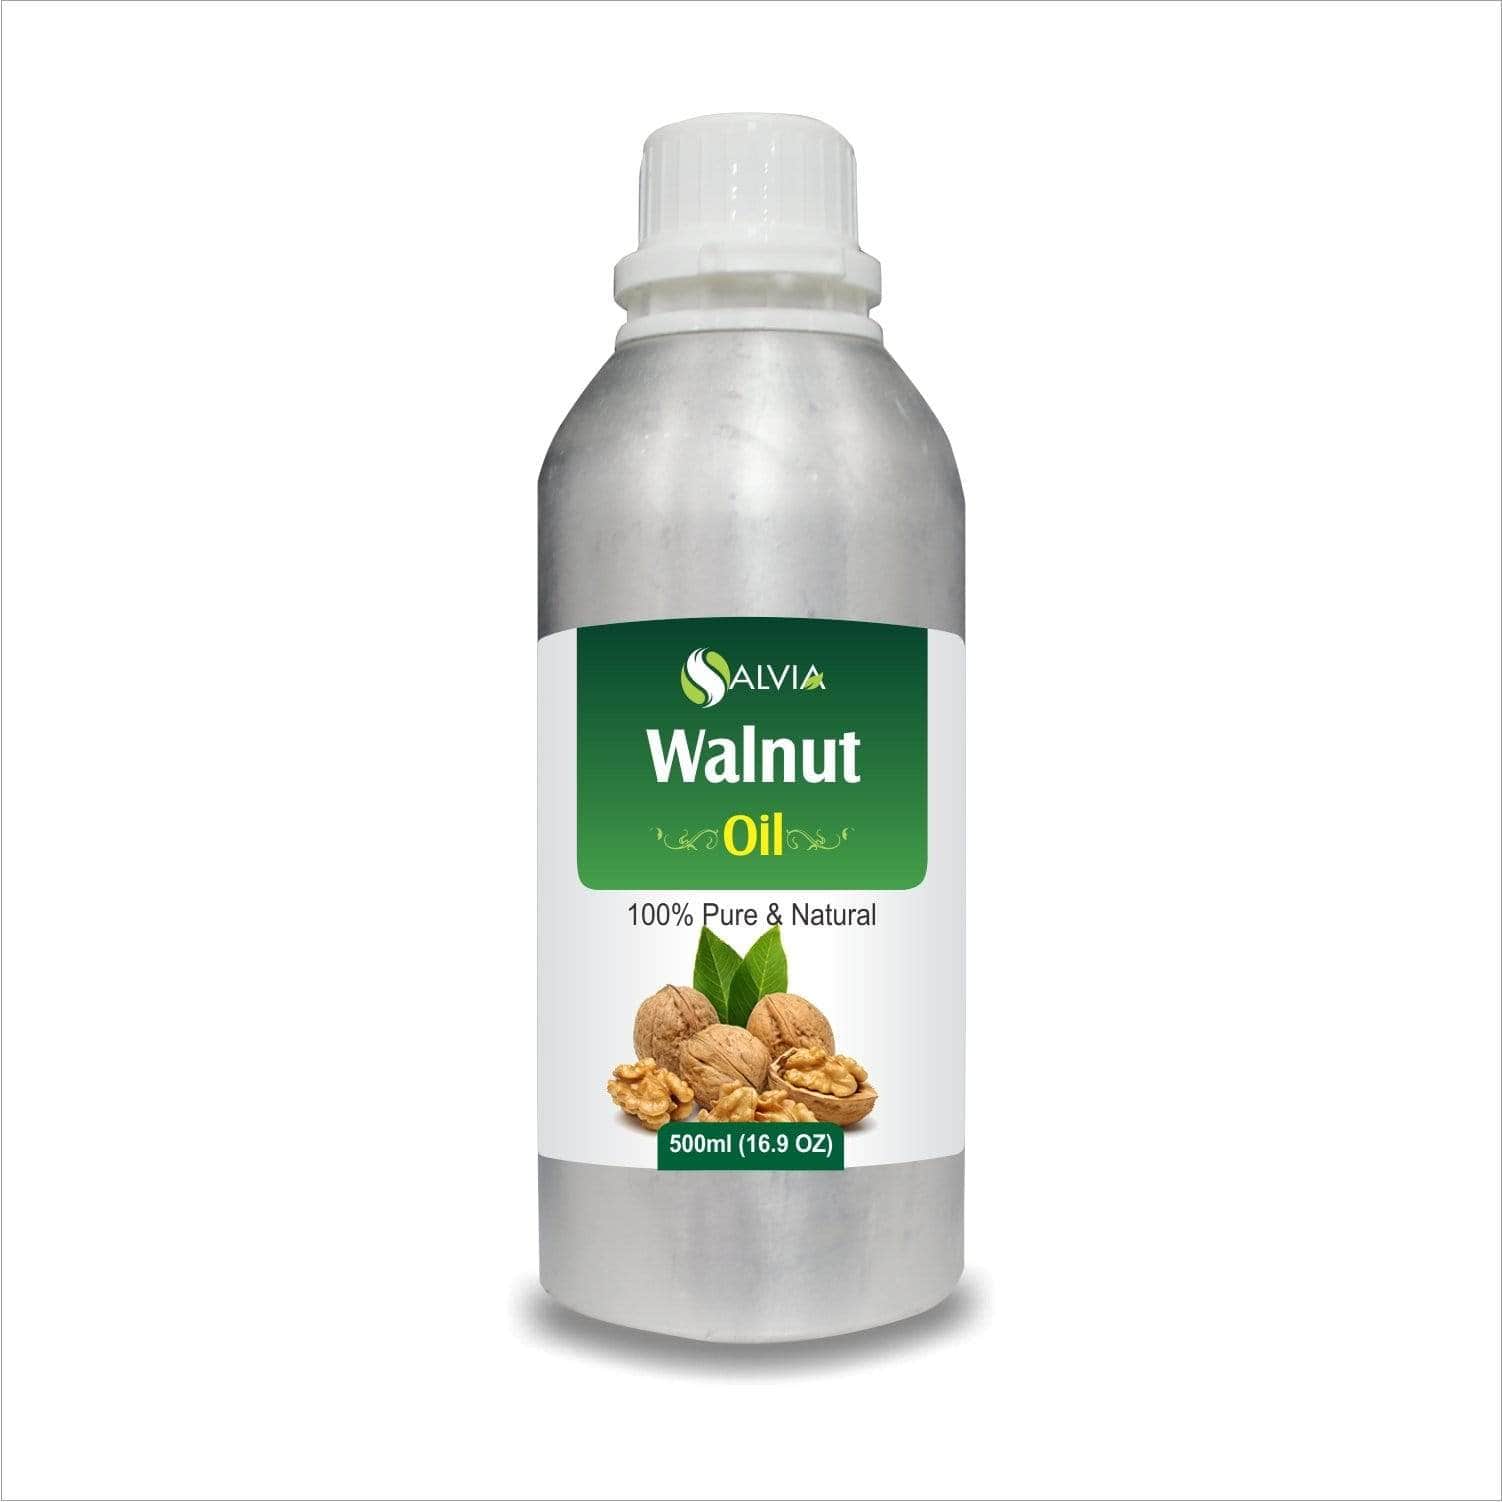 Salvia Natural Carrier Oils 500ml Walnut Oil (Juglans-Regia) 100% Natural Pure Carrier Oil Strengthens Hair Root, Promotes hair Growth, Anti-Aging Properties, Moisturizes, Reduces Scars, Solves  Psoriasis & More